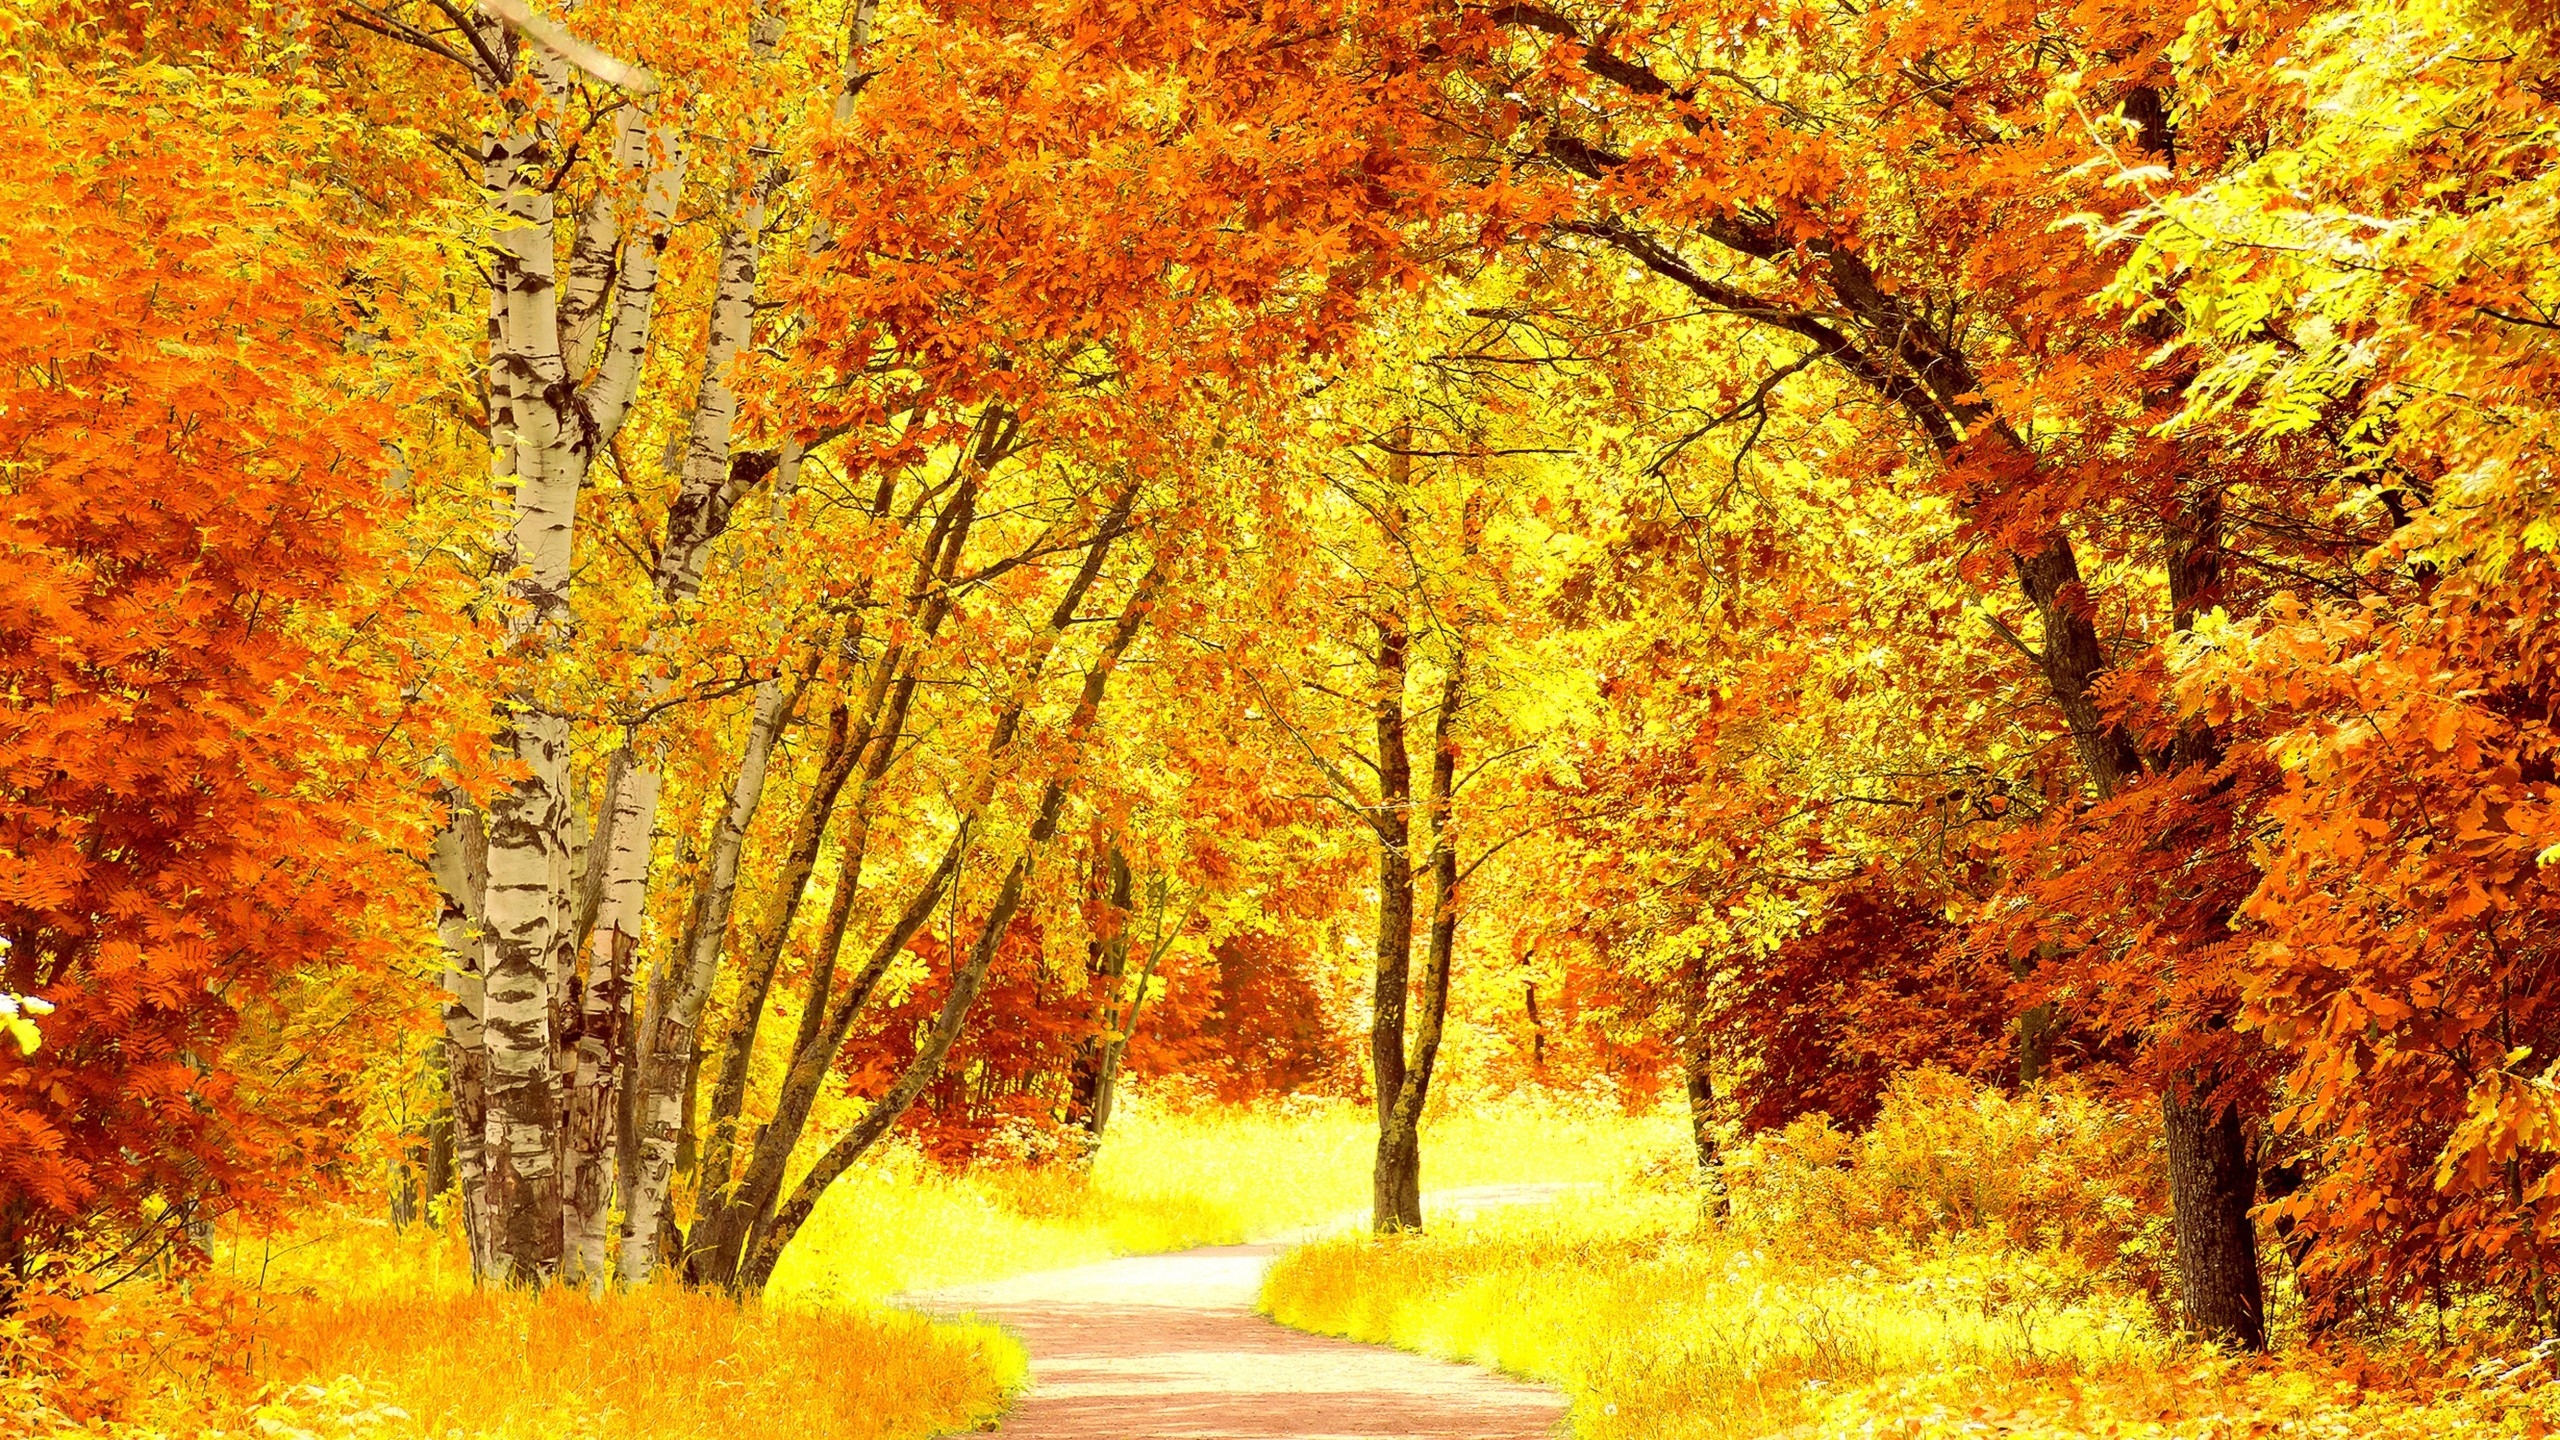 Yellow Autumn Landscape for 2560x1440 HDTV resolution